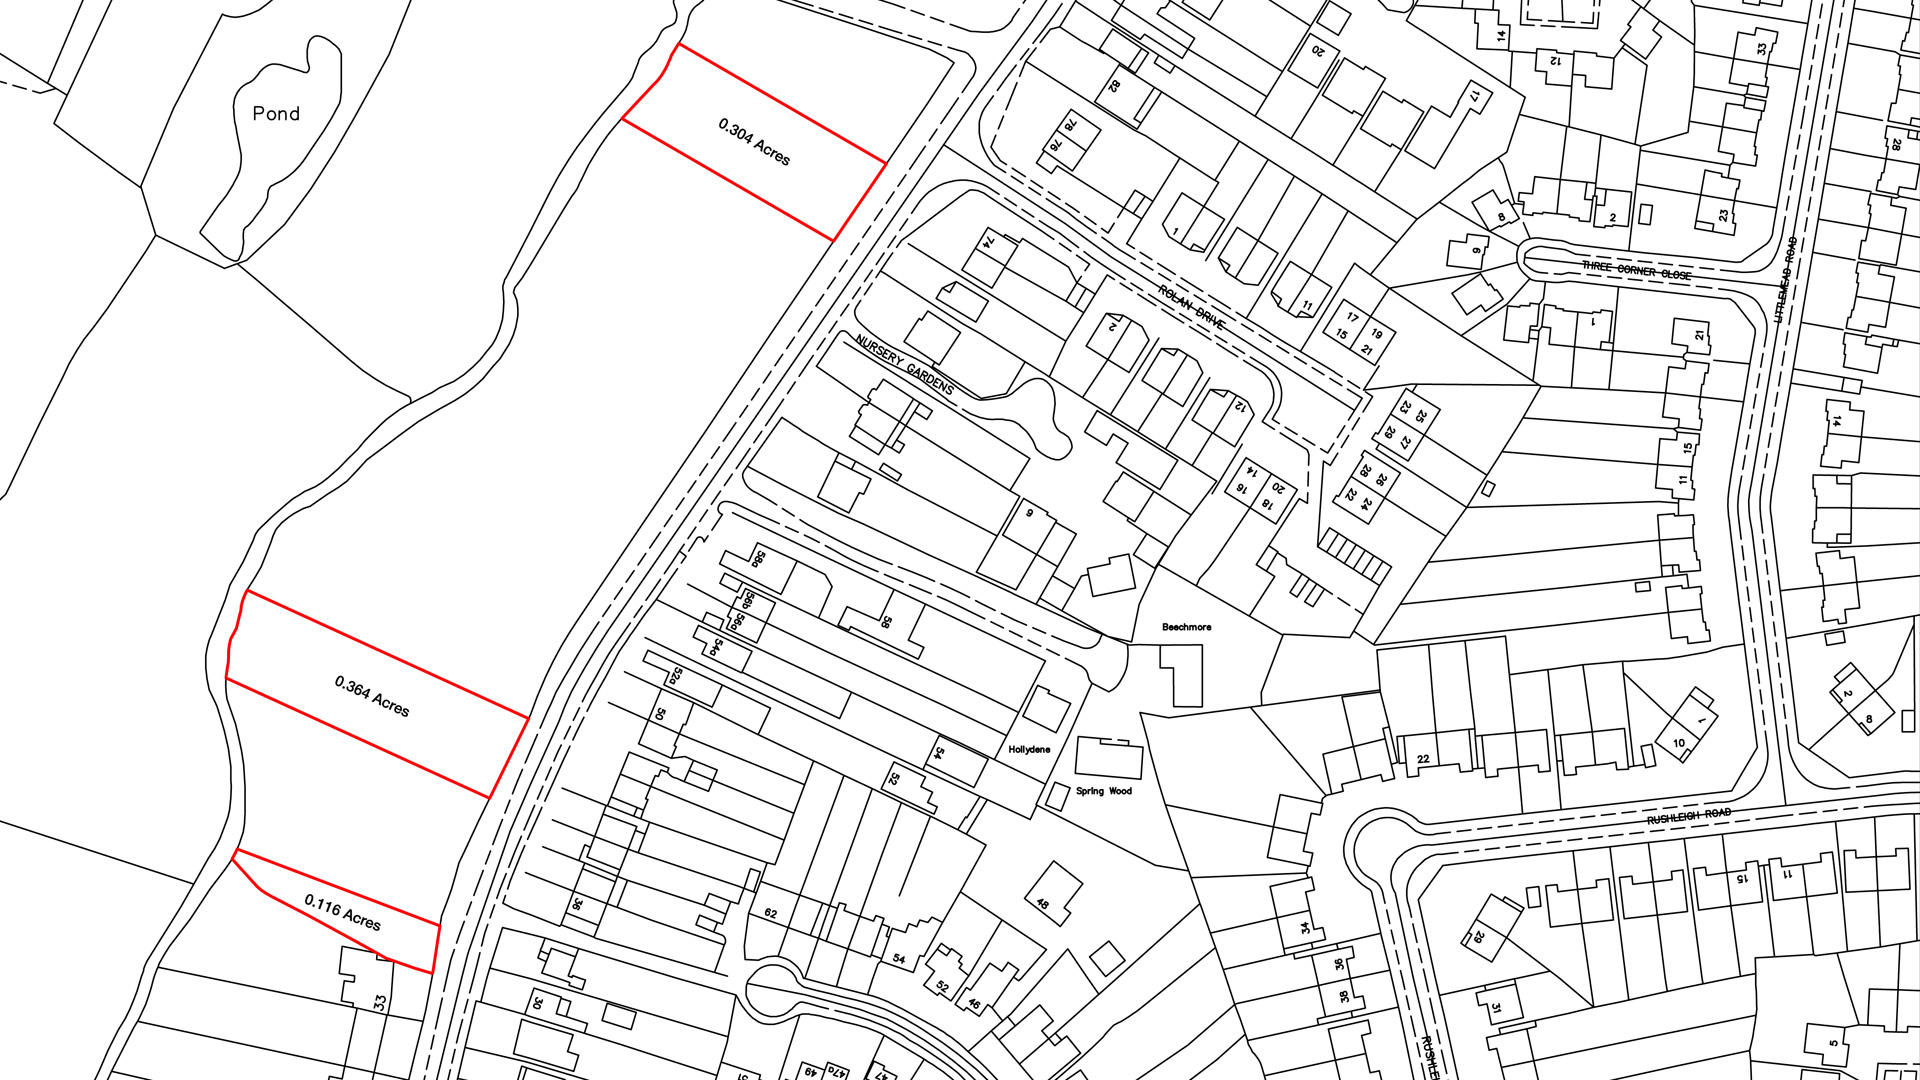 Land for sale on Peterbrook Road, Solihull site plan